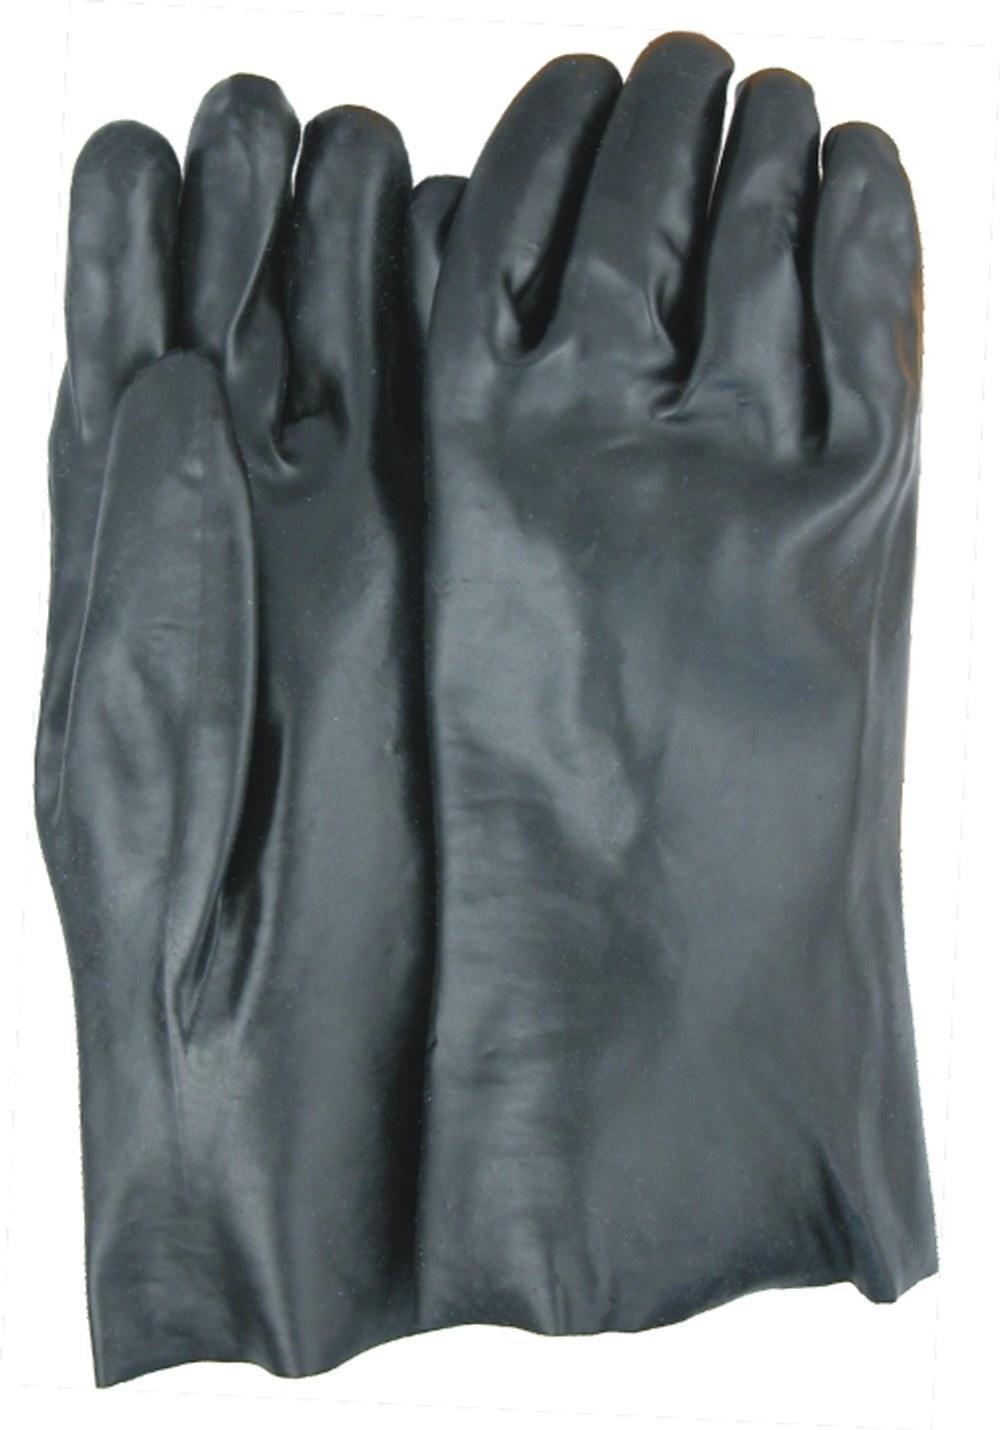 Majestic 3363 Black PVC Dipped Gloves Smooth Finish Interlock Lined 12 ...